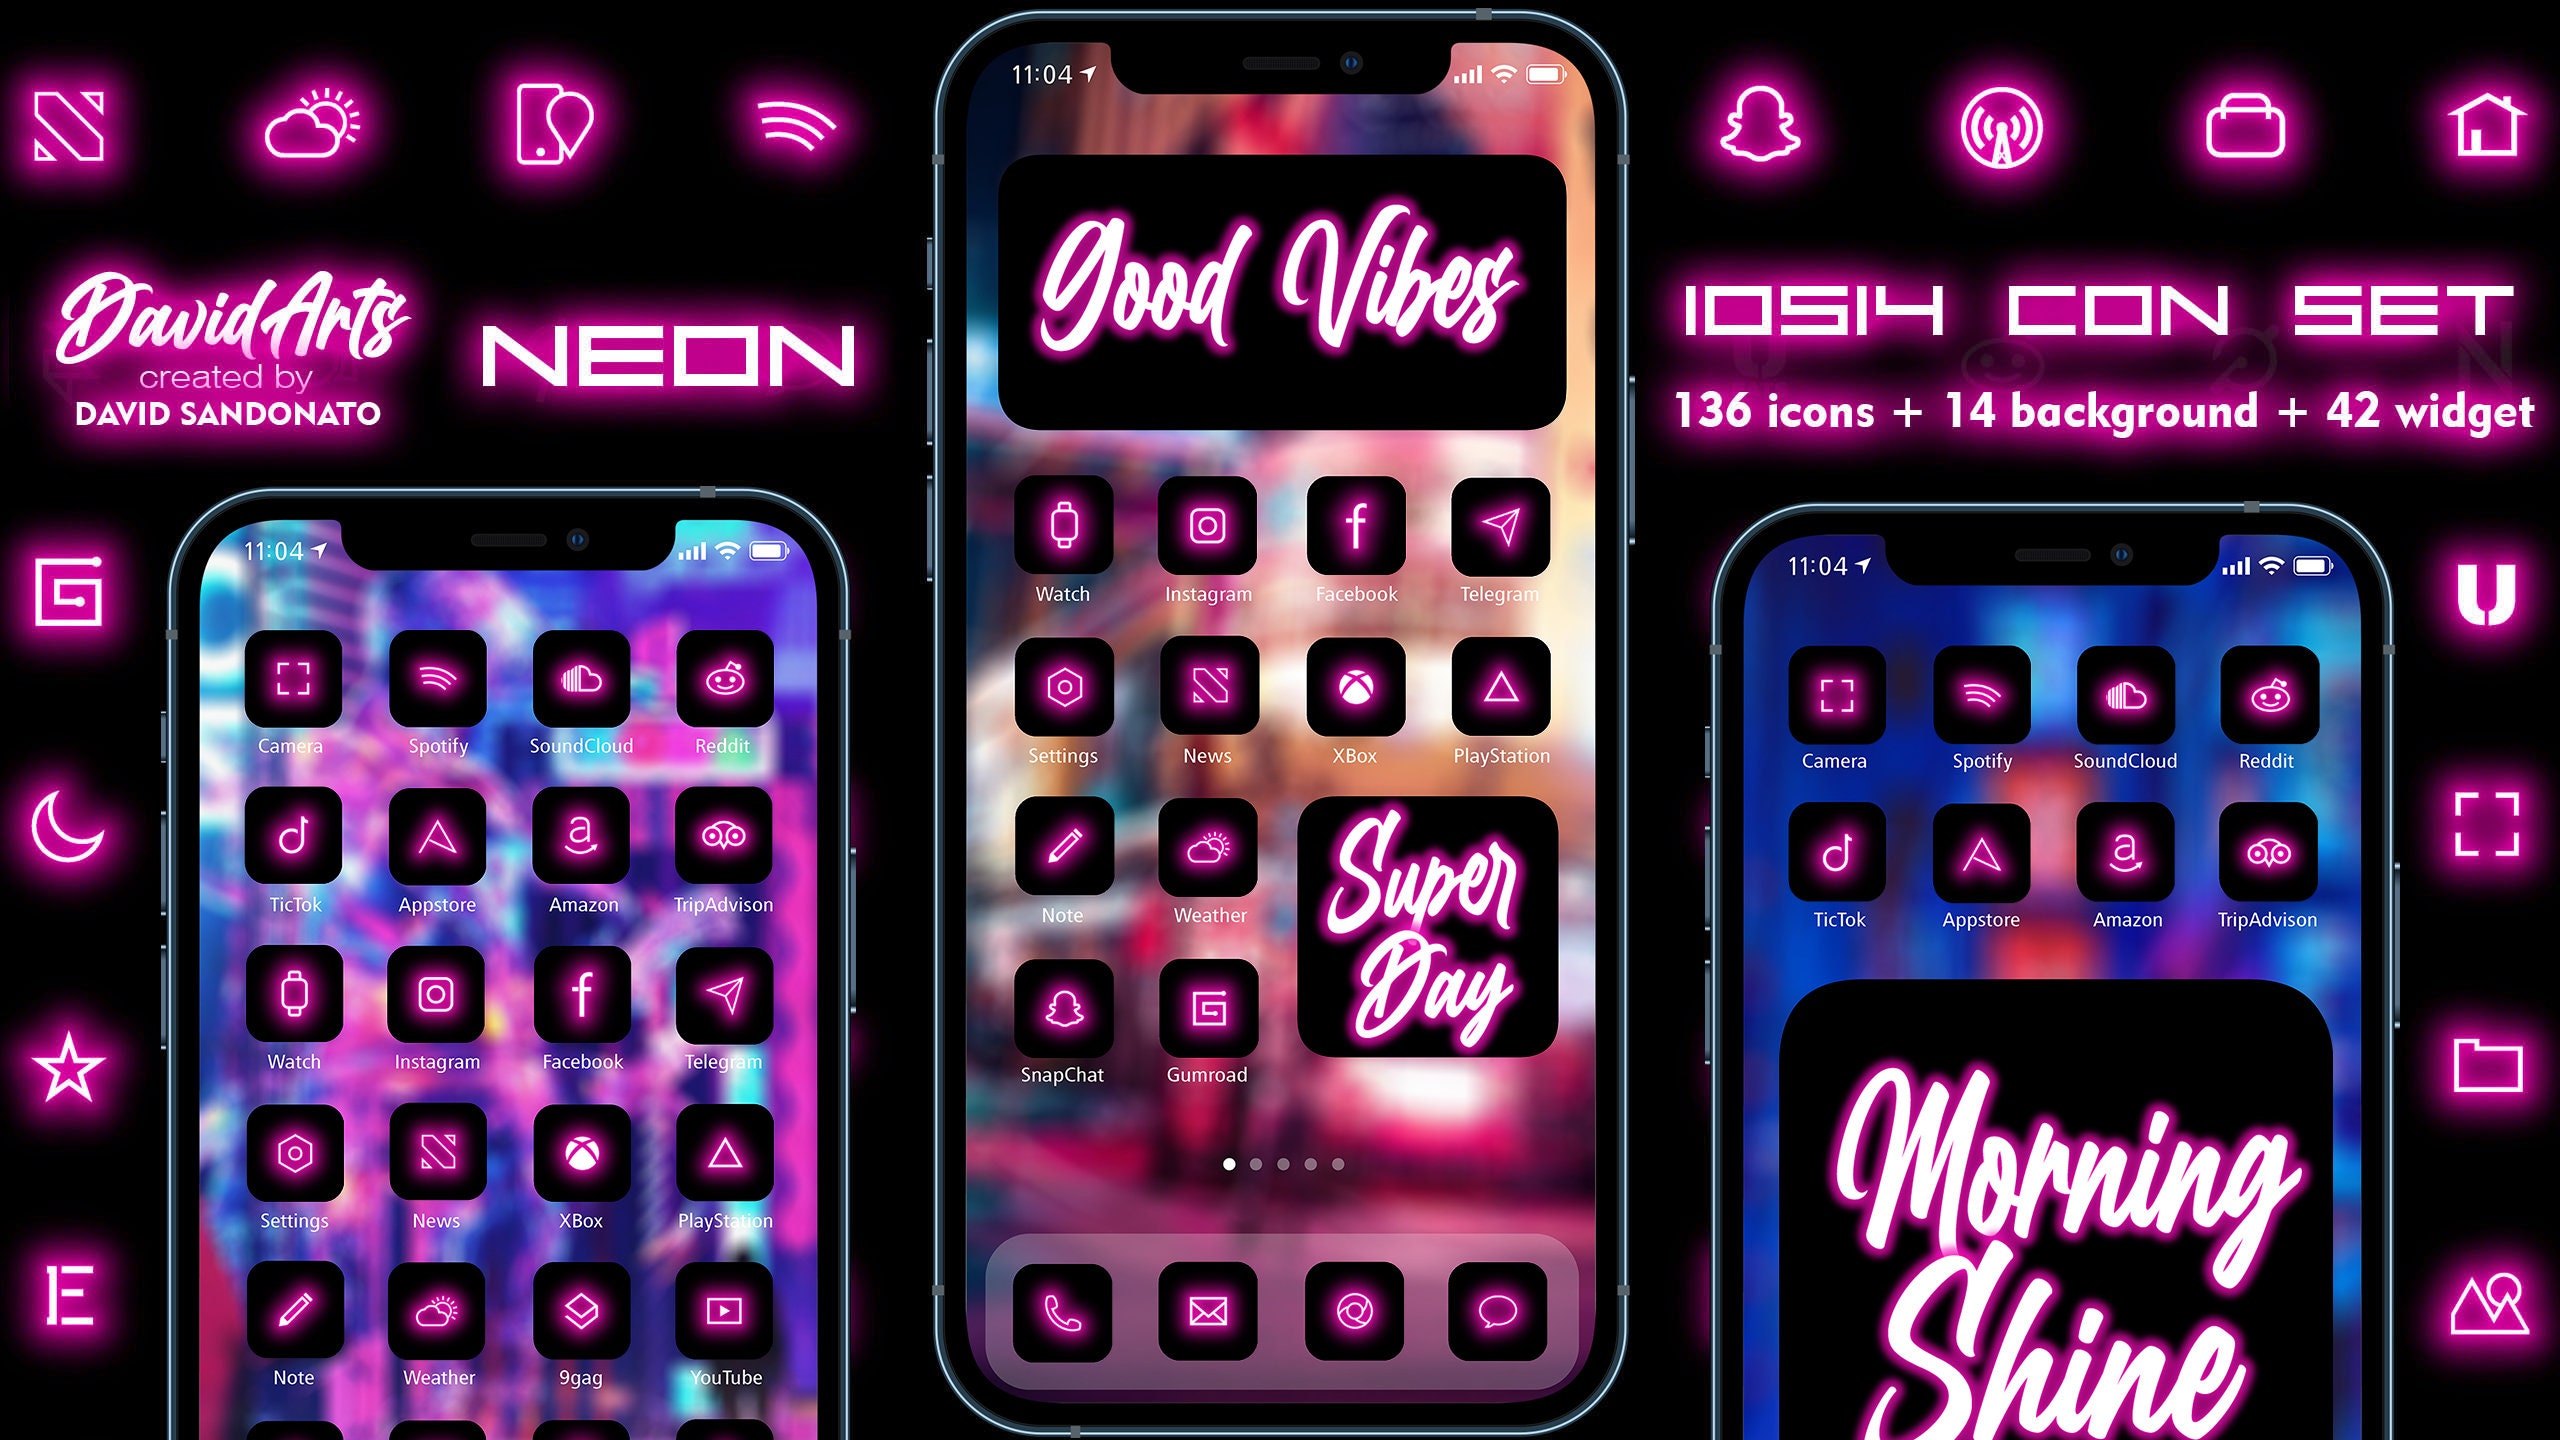 Neon Pink Ios14 Icon Set 136 Icons and Backgrounds Iphone - Etsy New Zealand